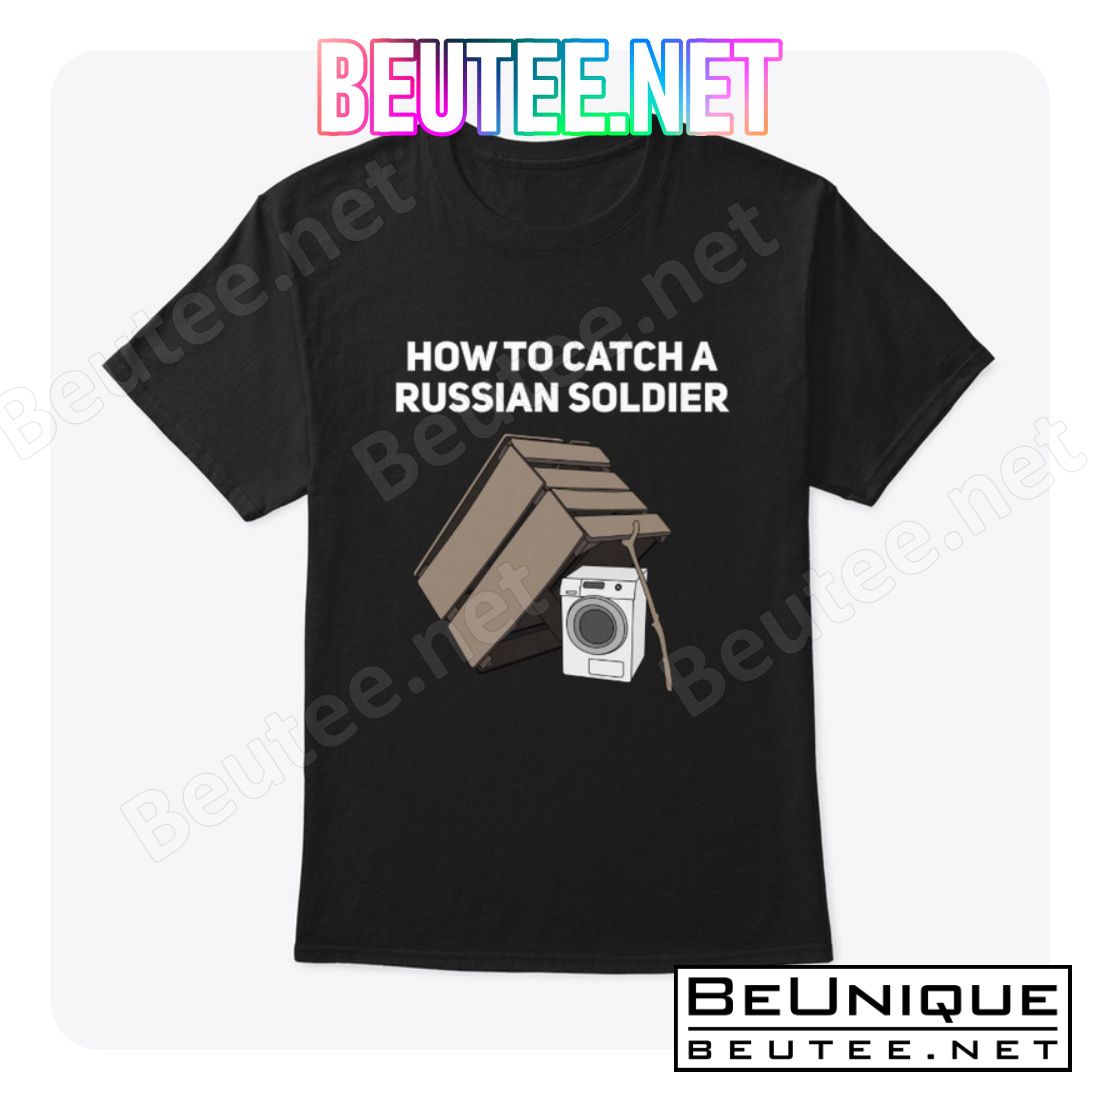 How To Catch A Russian Soldier Shirt